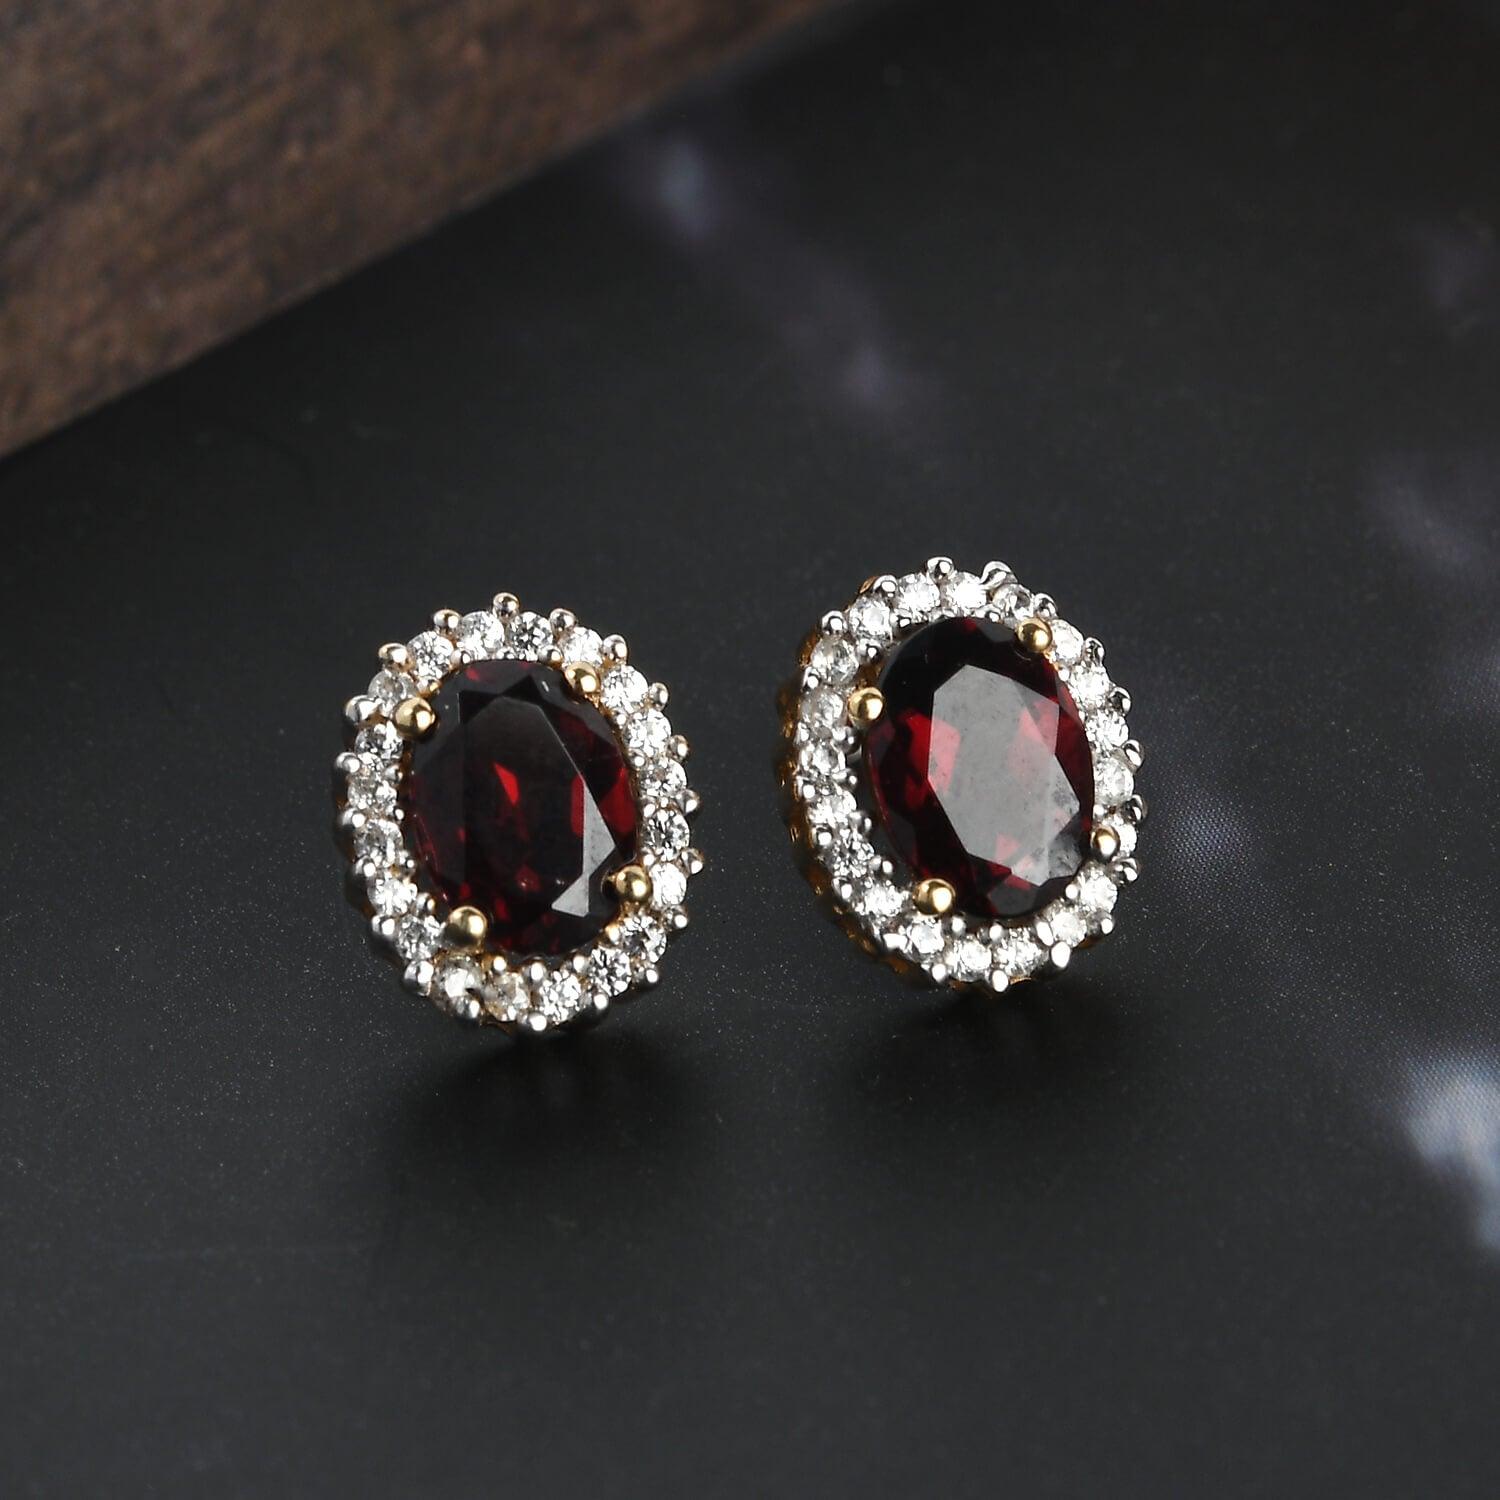 Discover the Meaning and Beauty of Red Garnet - January's Birthstone - Inspiring Jewellery